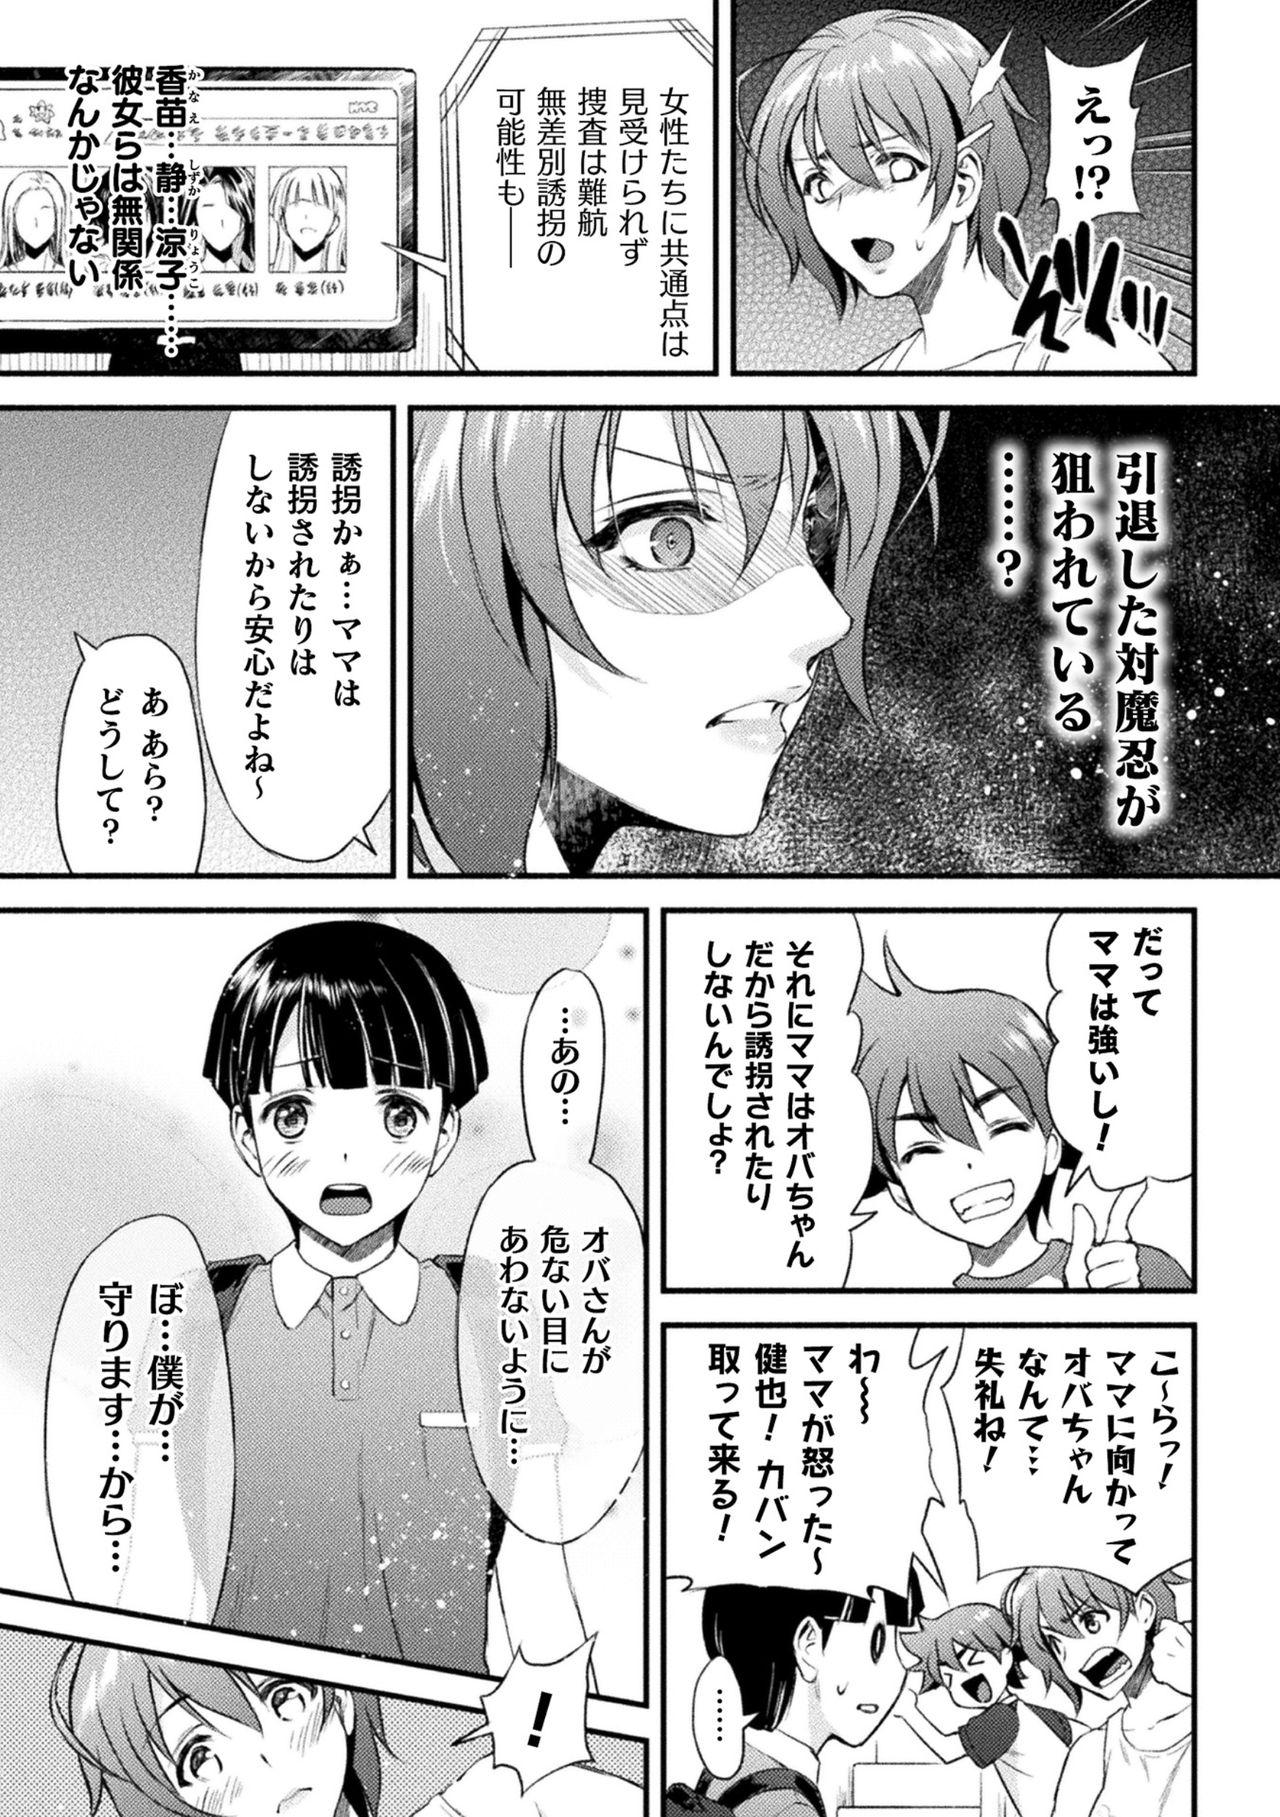 Audition Mama Wa Taimanin THE COMIC Ch. 1-9 Tanned - Page 8